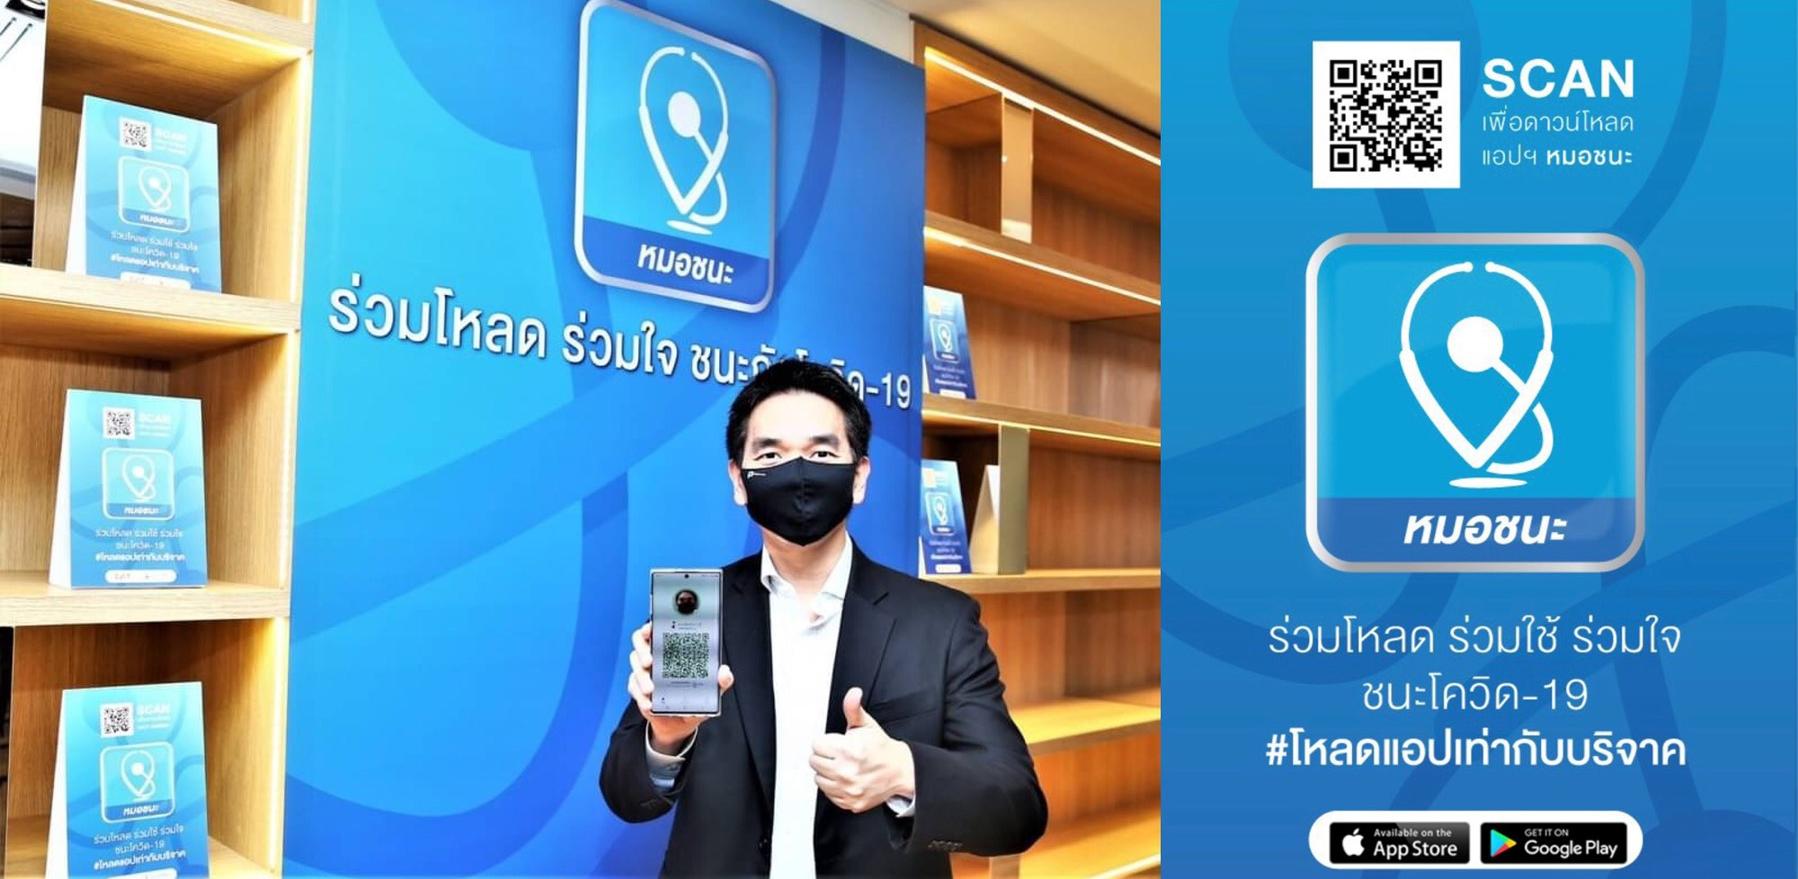 Thailand launches Mor Chana mobile app to enhance contact tracing efforts to help stop the spread of COVID-19